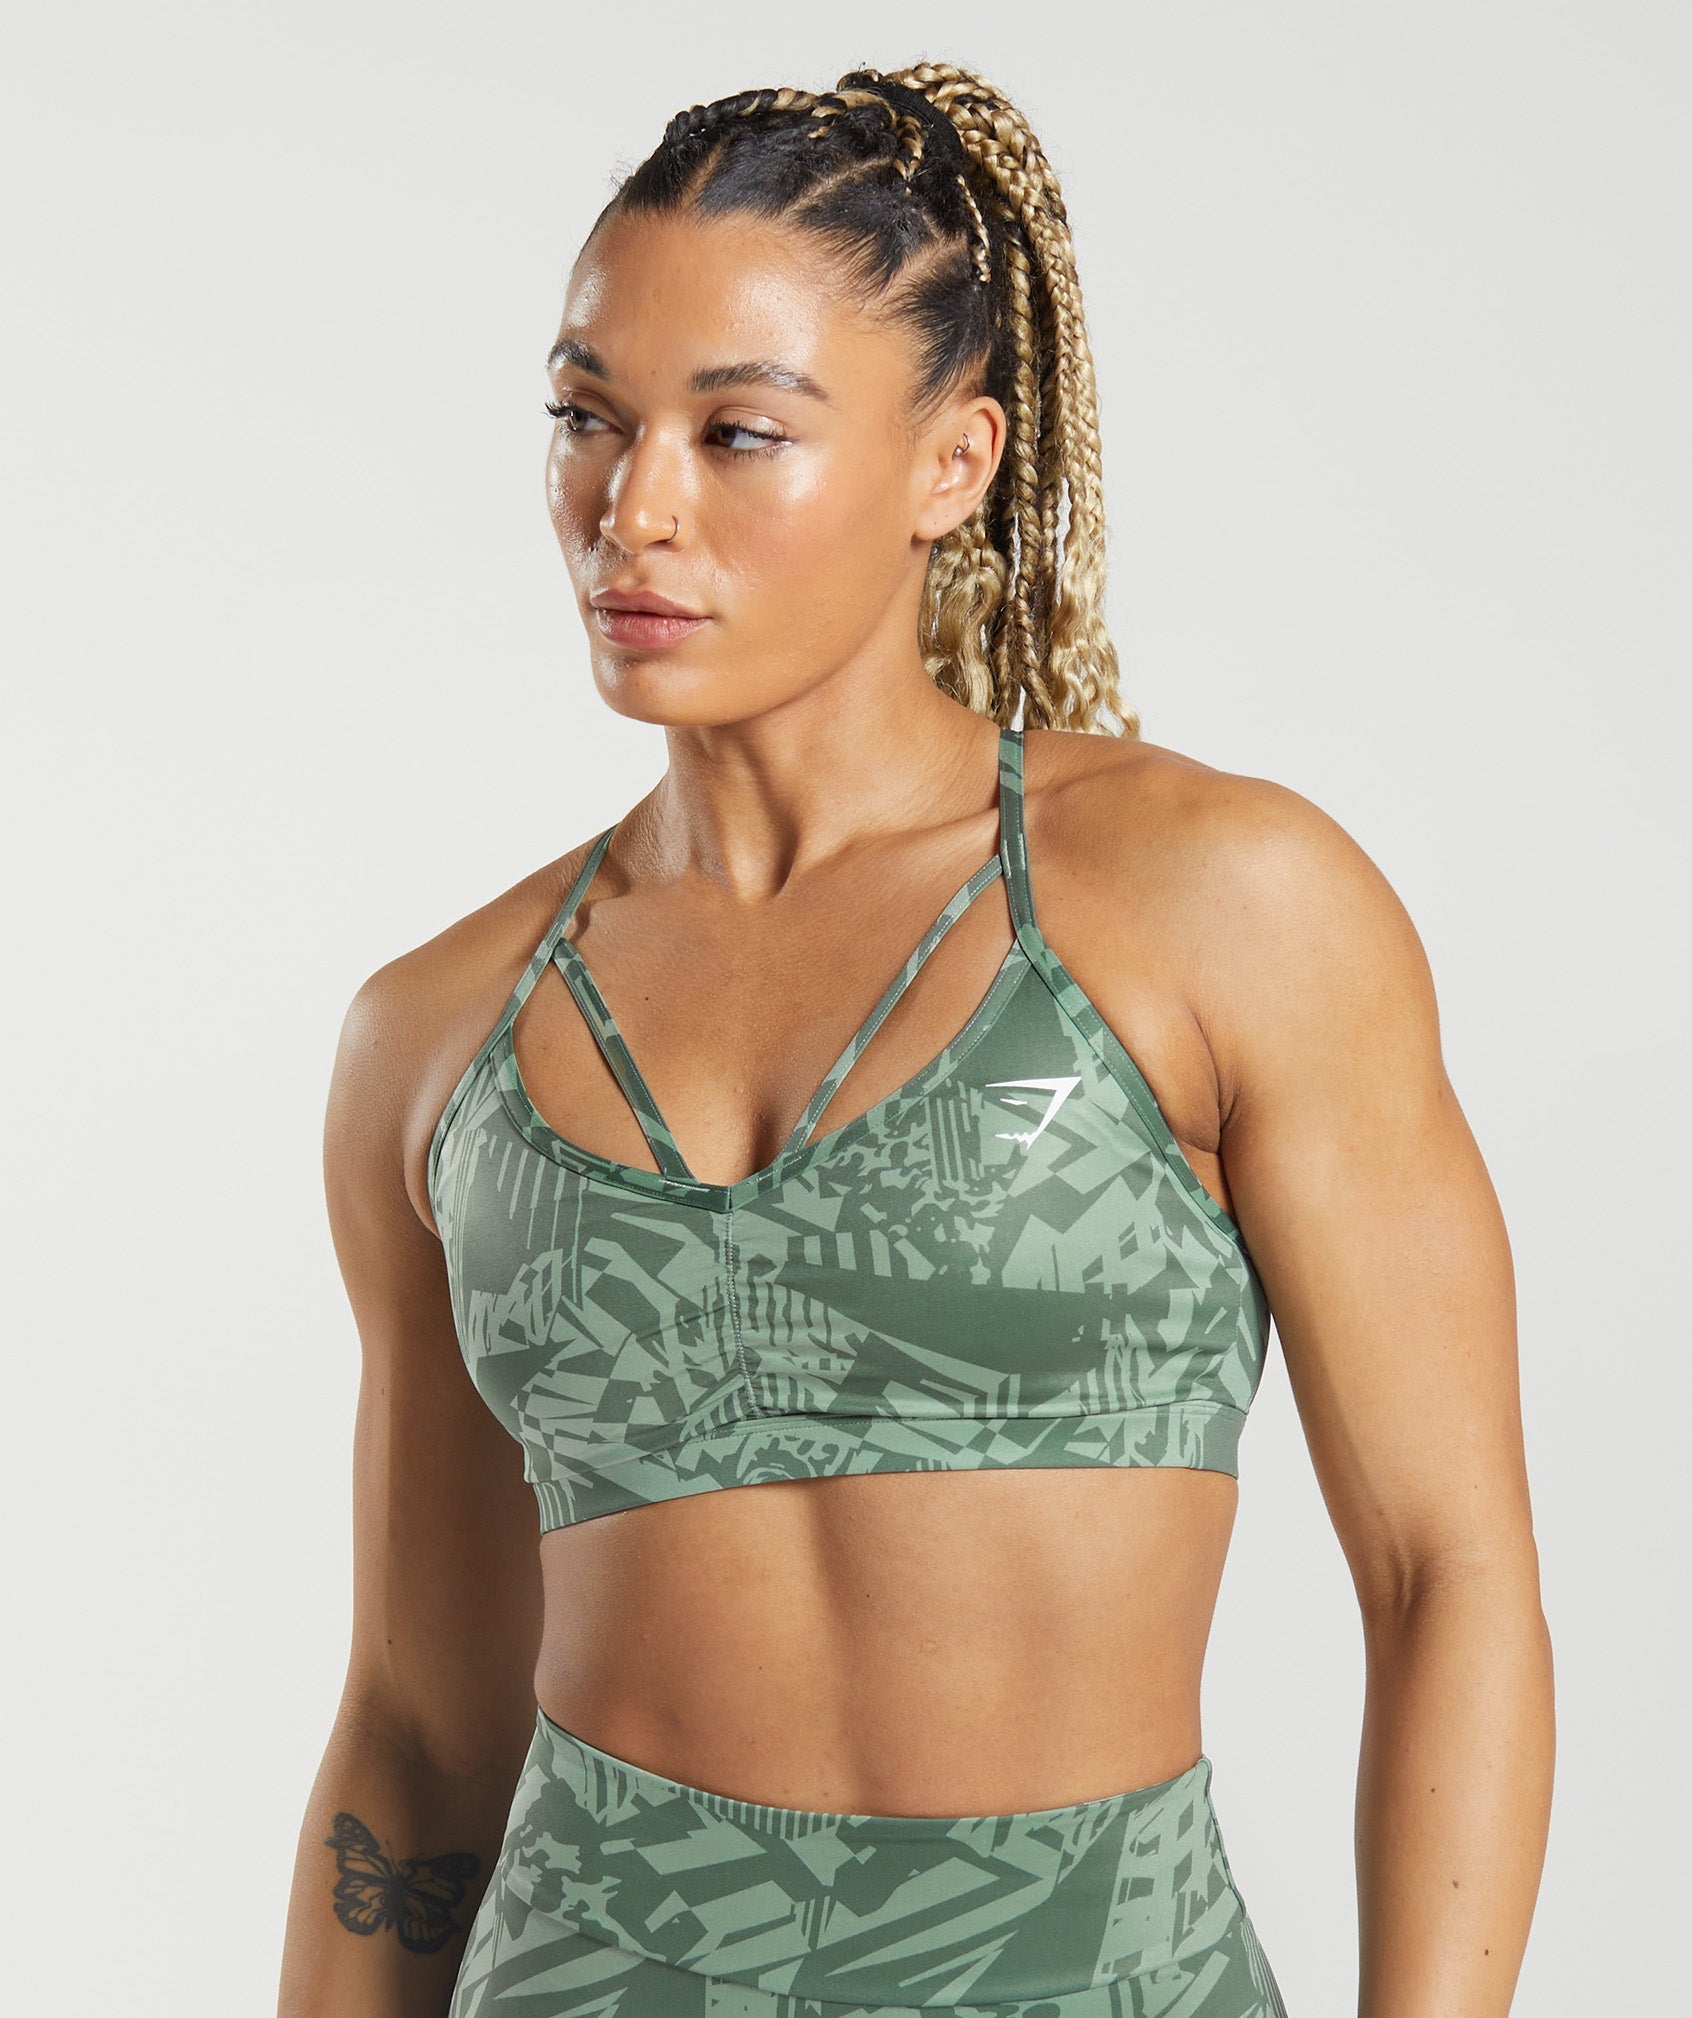 Empower your workout in style with our new Rich Babies Razorback Sports Bras  & Cotton Rib Boxer Sets. Featuring intricate embroidery – the…